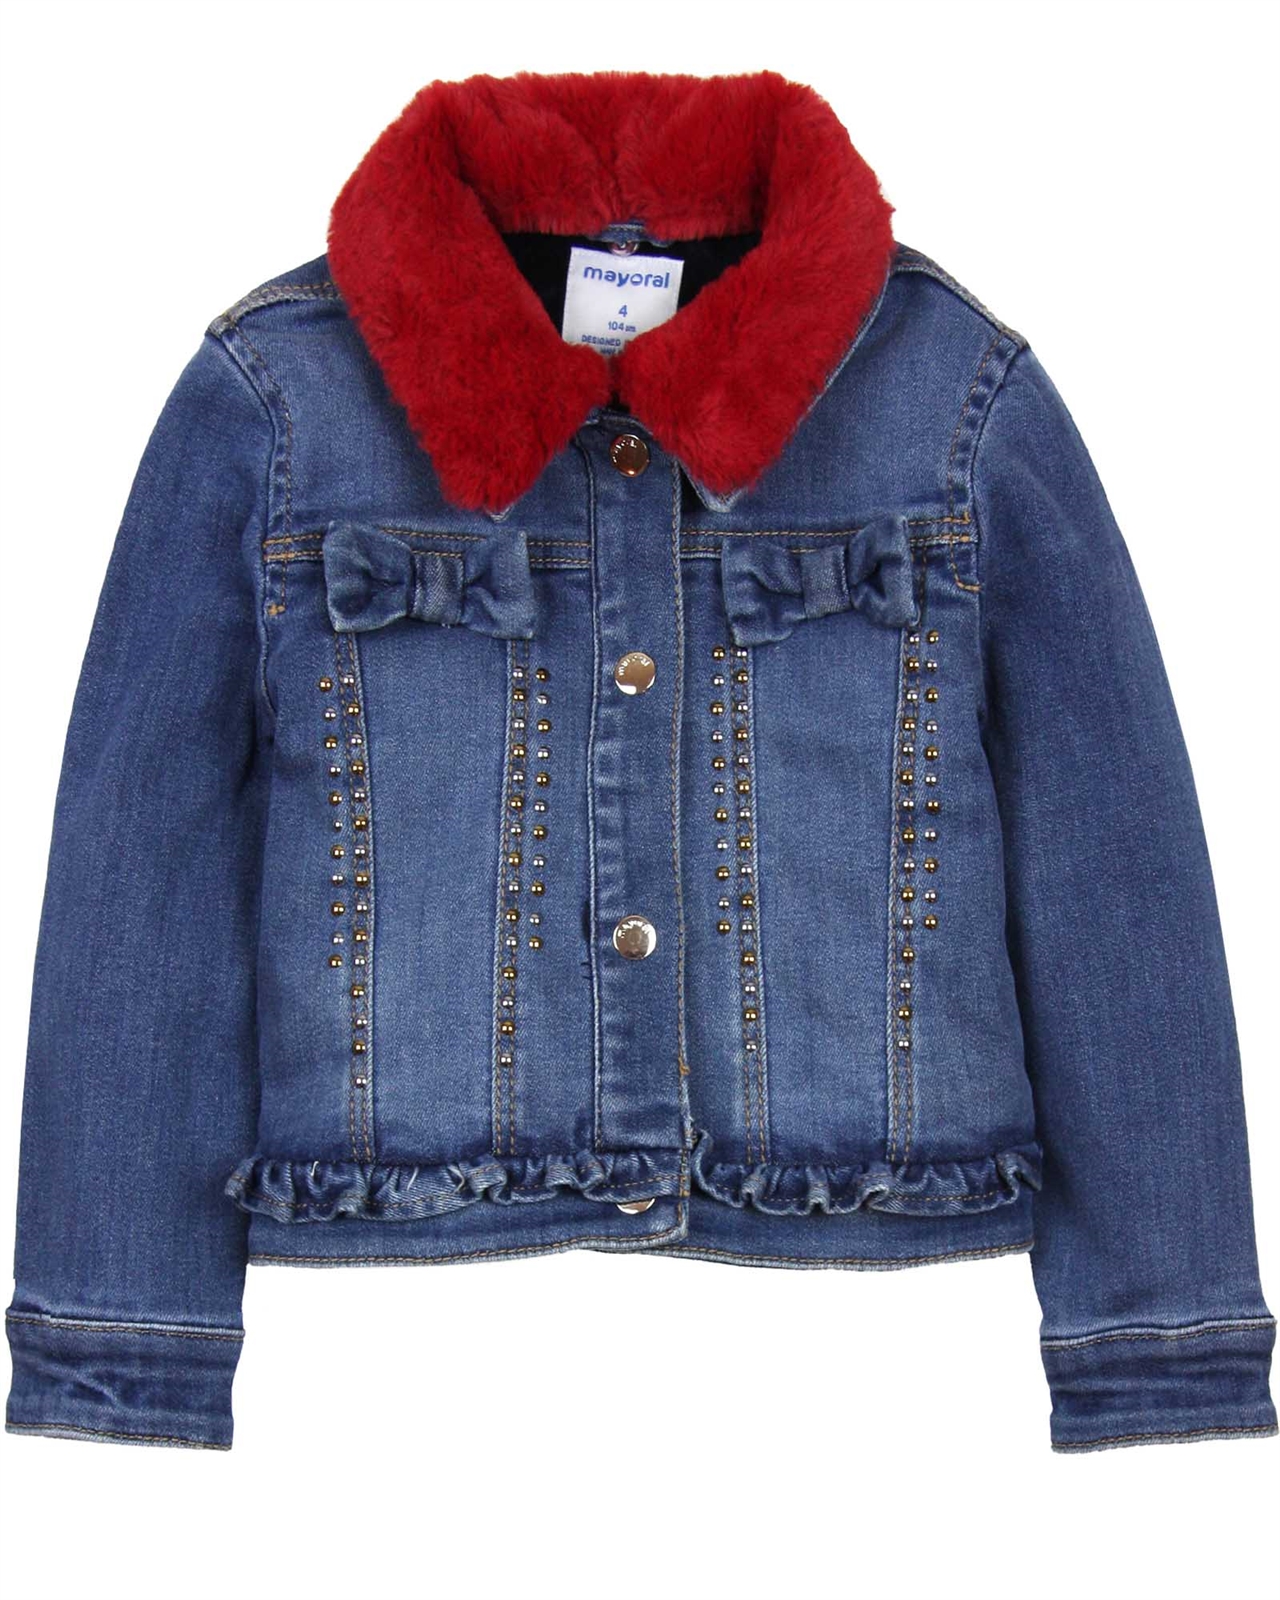 Womens Winter Denim Jacket: Plus Size Faux Fur Collar, Lamb And Cashmere  Insulated Coat For Cold Weather From Clothingforchoose, $33.62 | DHgate.Com